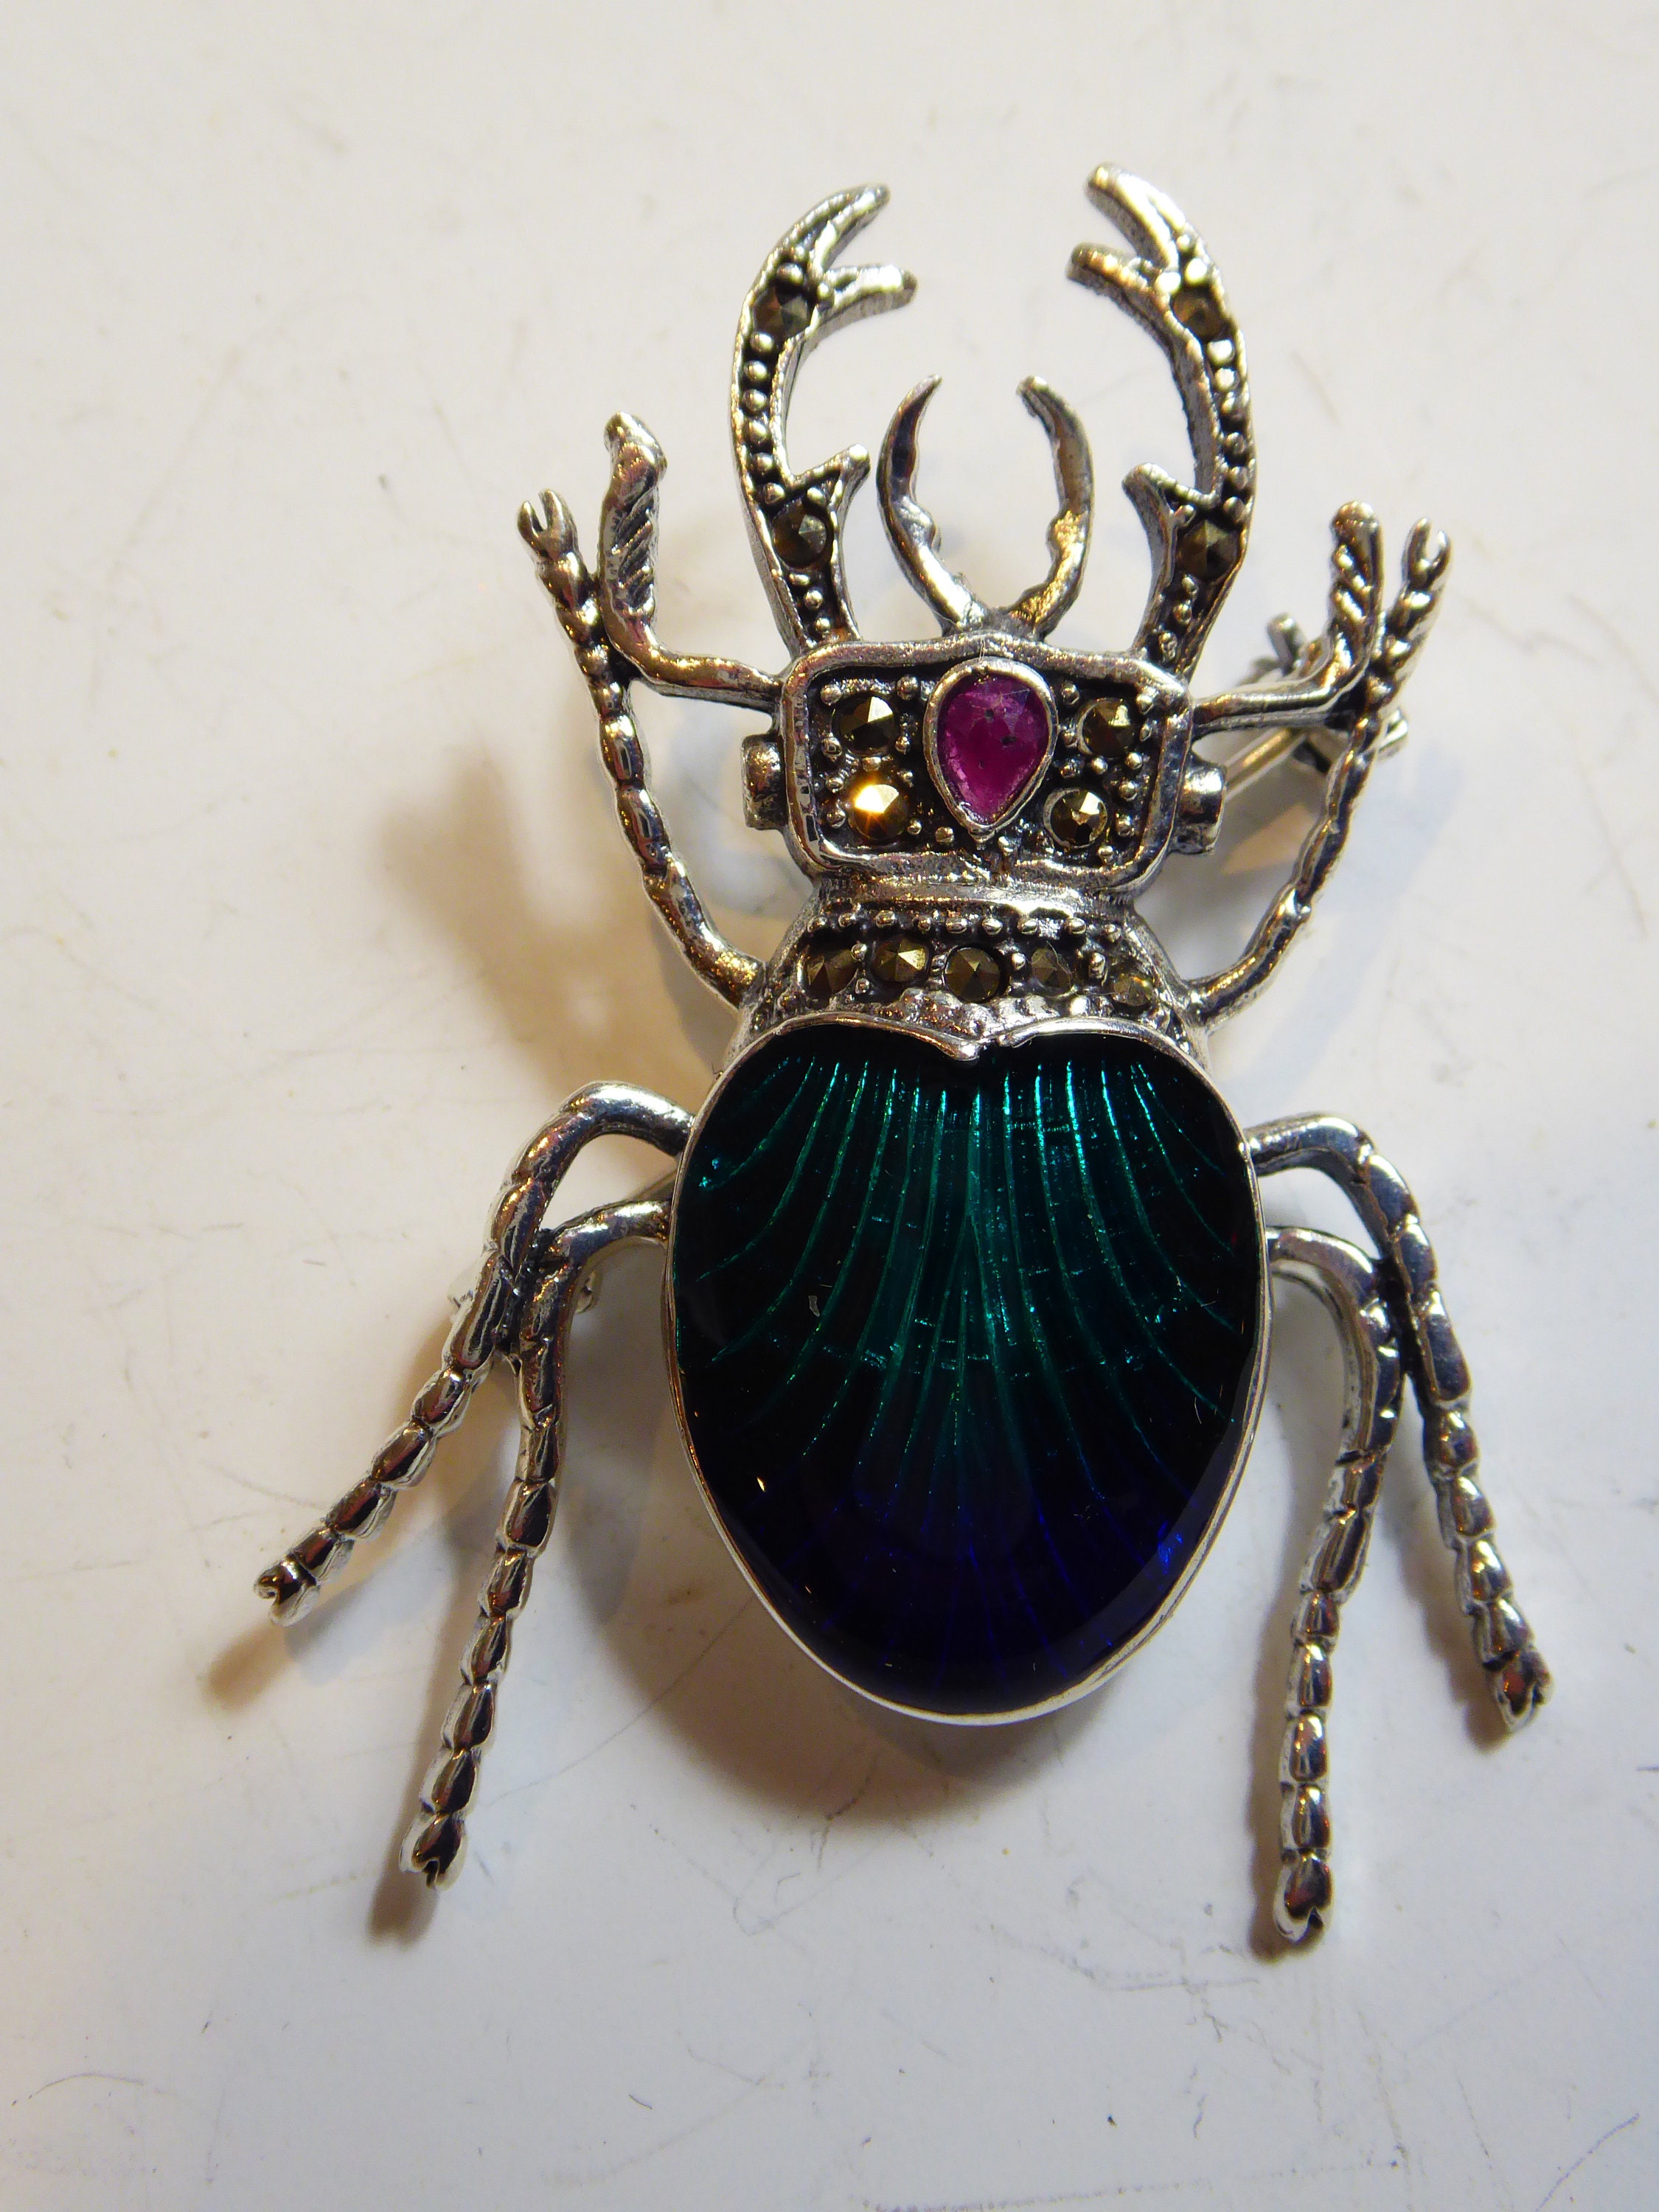 Quantiquecollectable Silver and Iridescent Enamel Scarab Beetle Brooch